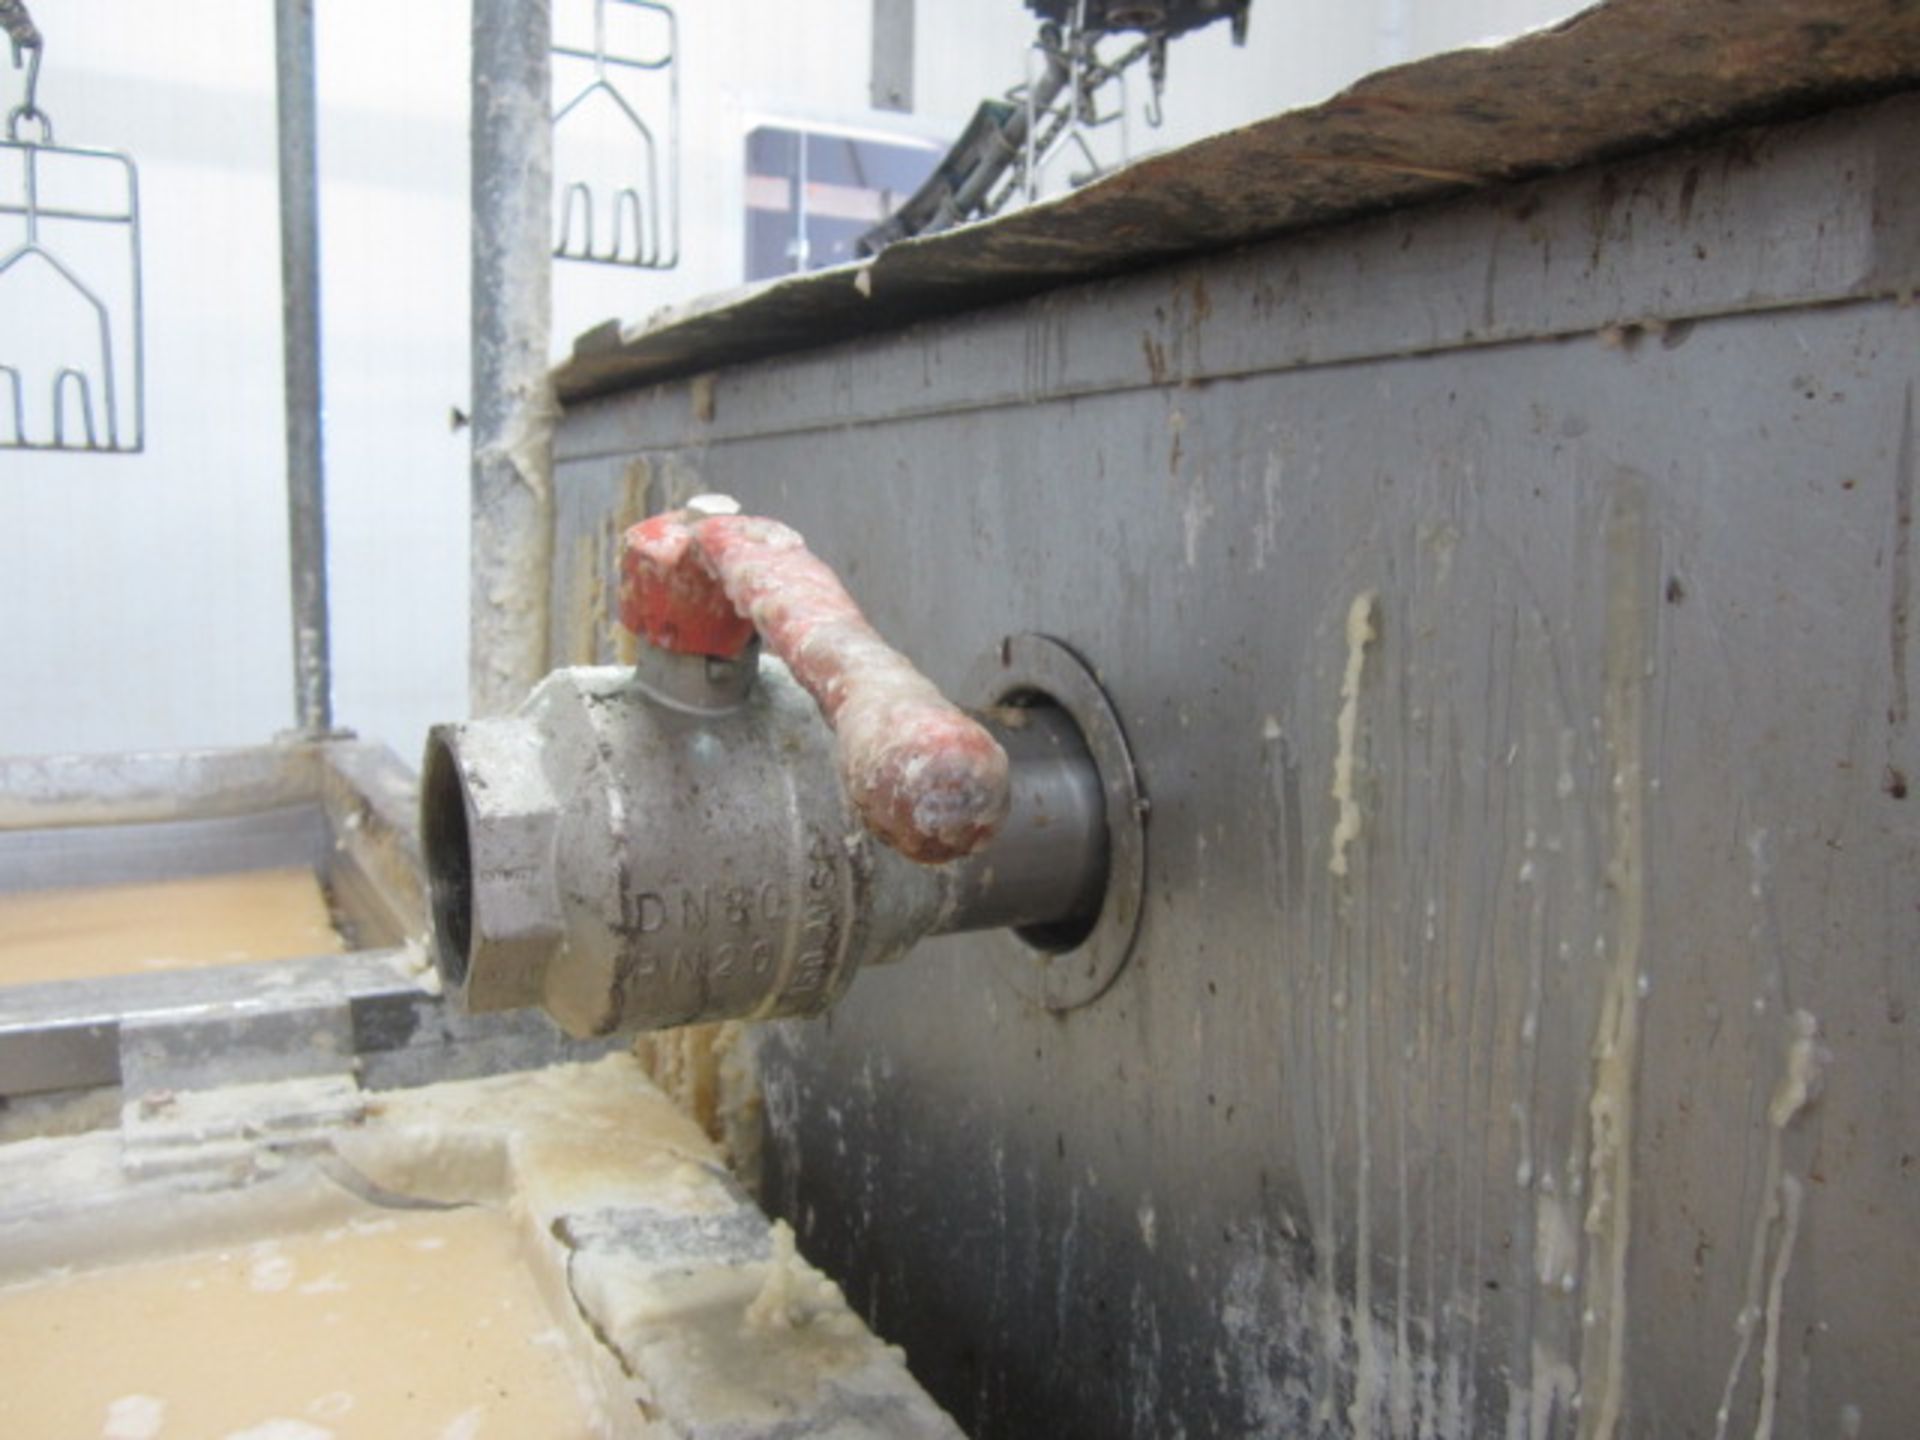 Bayle freestanding wax reclaiming tank with outlet valve, approx. size: 1m x 1.8m x depth 580mm - Image 6 of 7